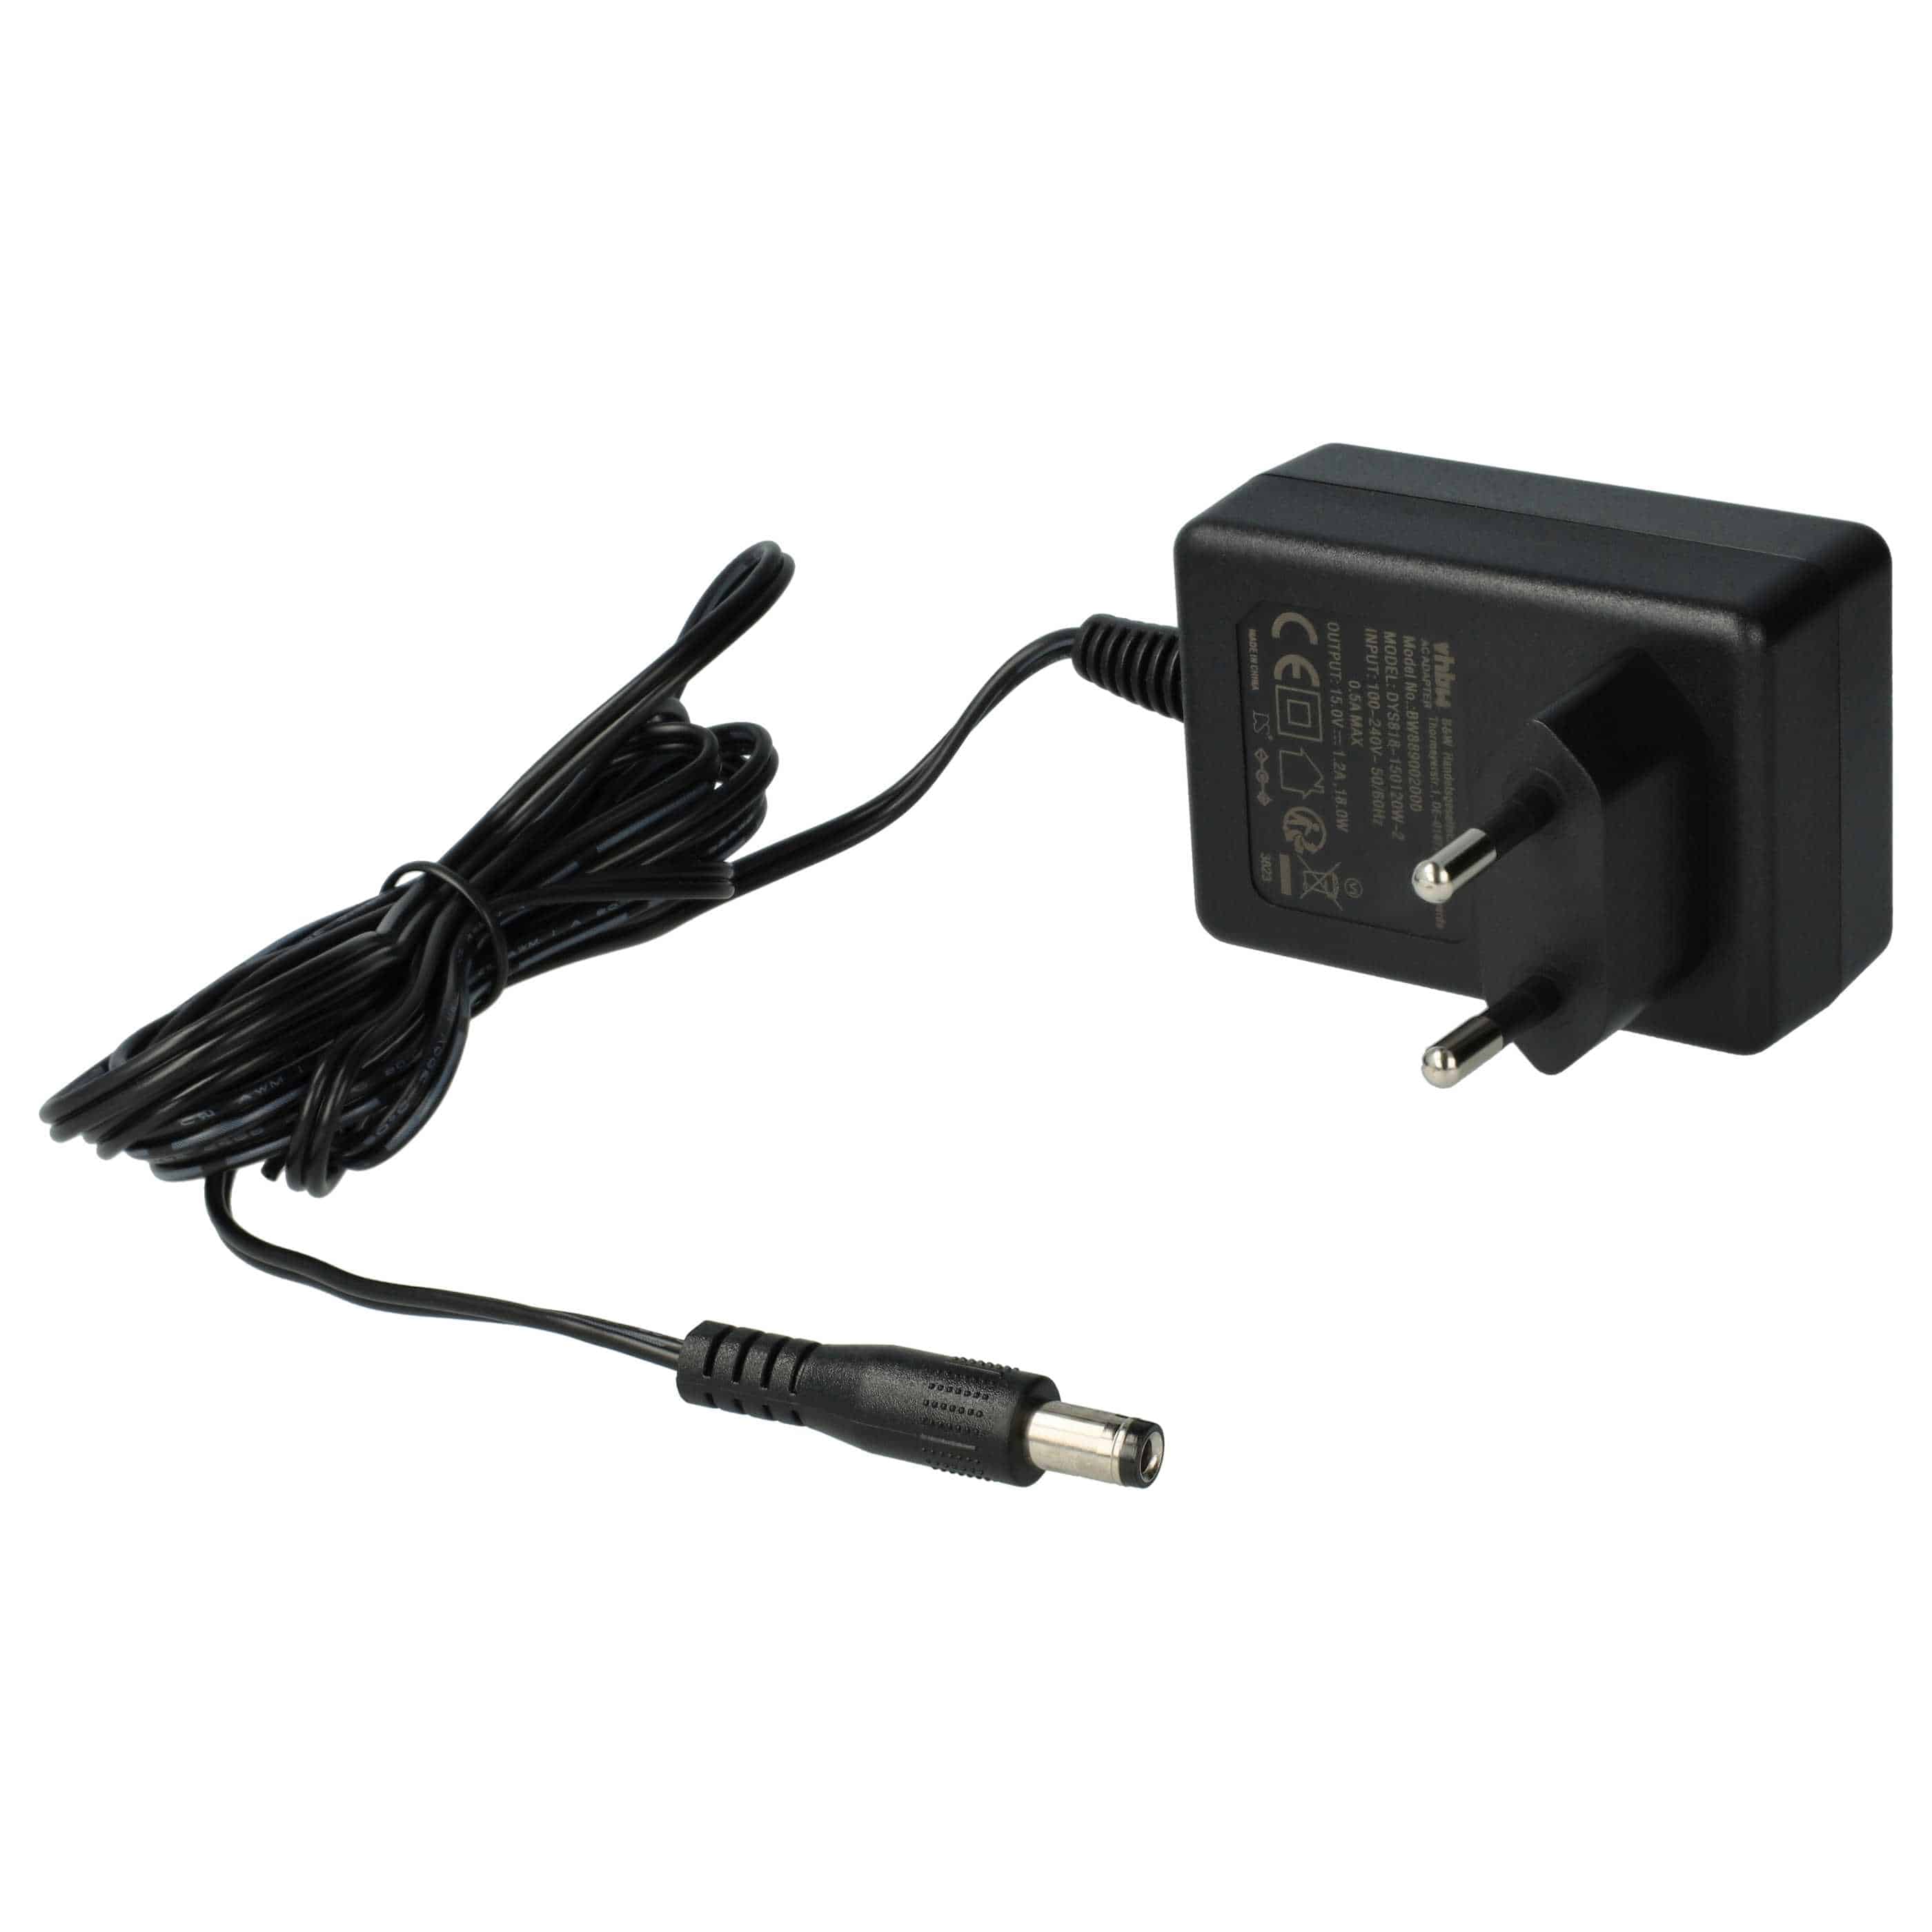 Mains Power Adapter replaces AcBel AD7016 for Pro-Ject Modem etc. - 175 cm